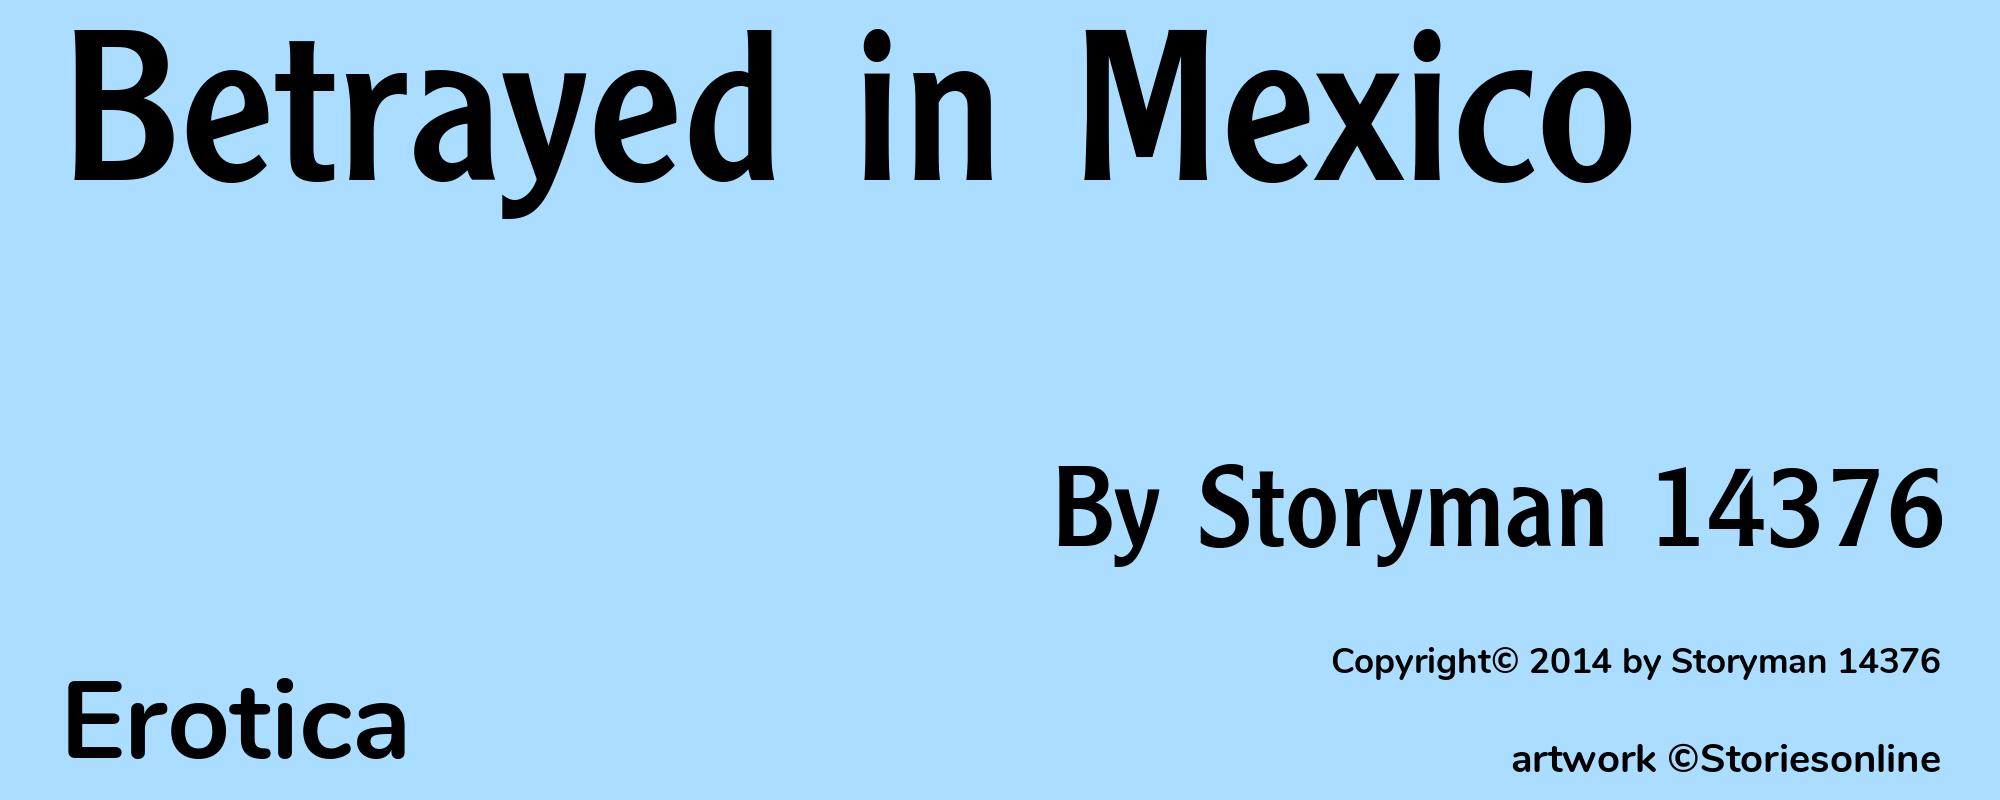 Betrayed in Mexico - Cover